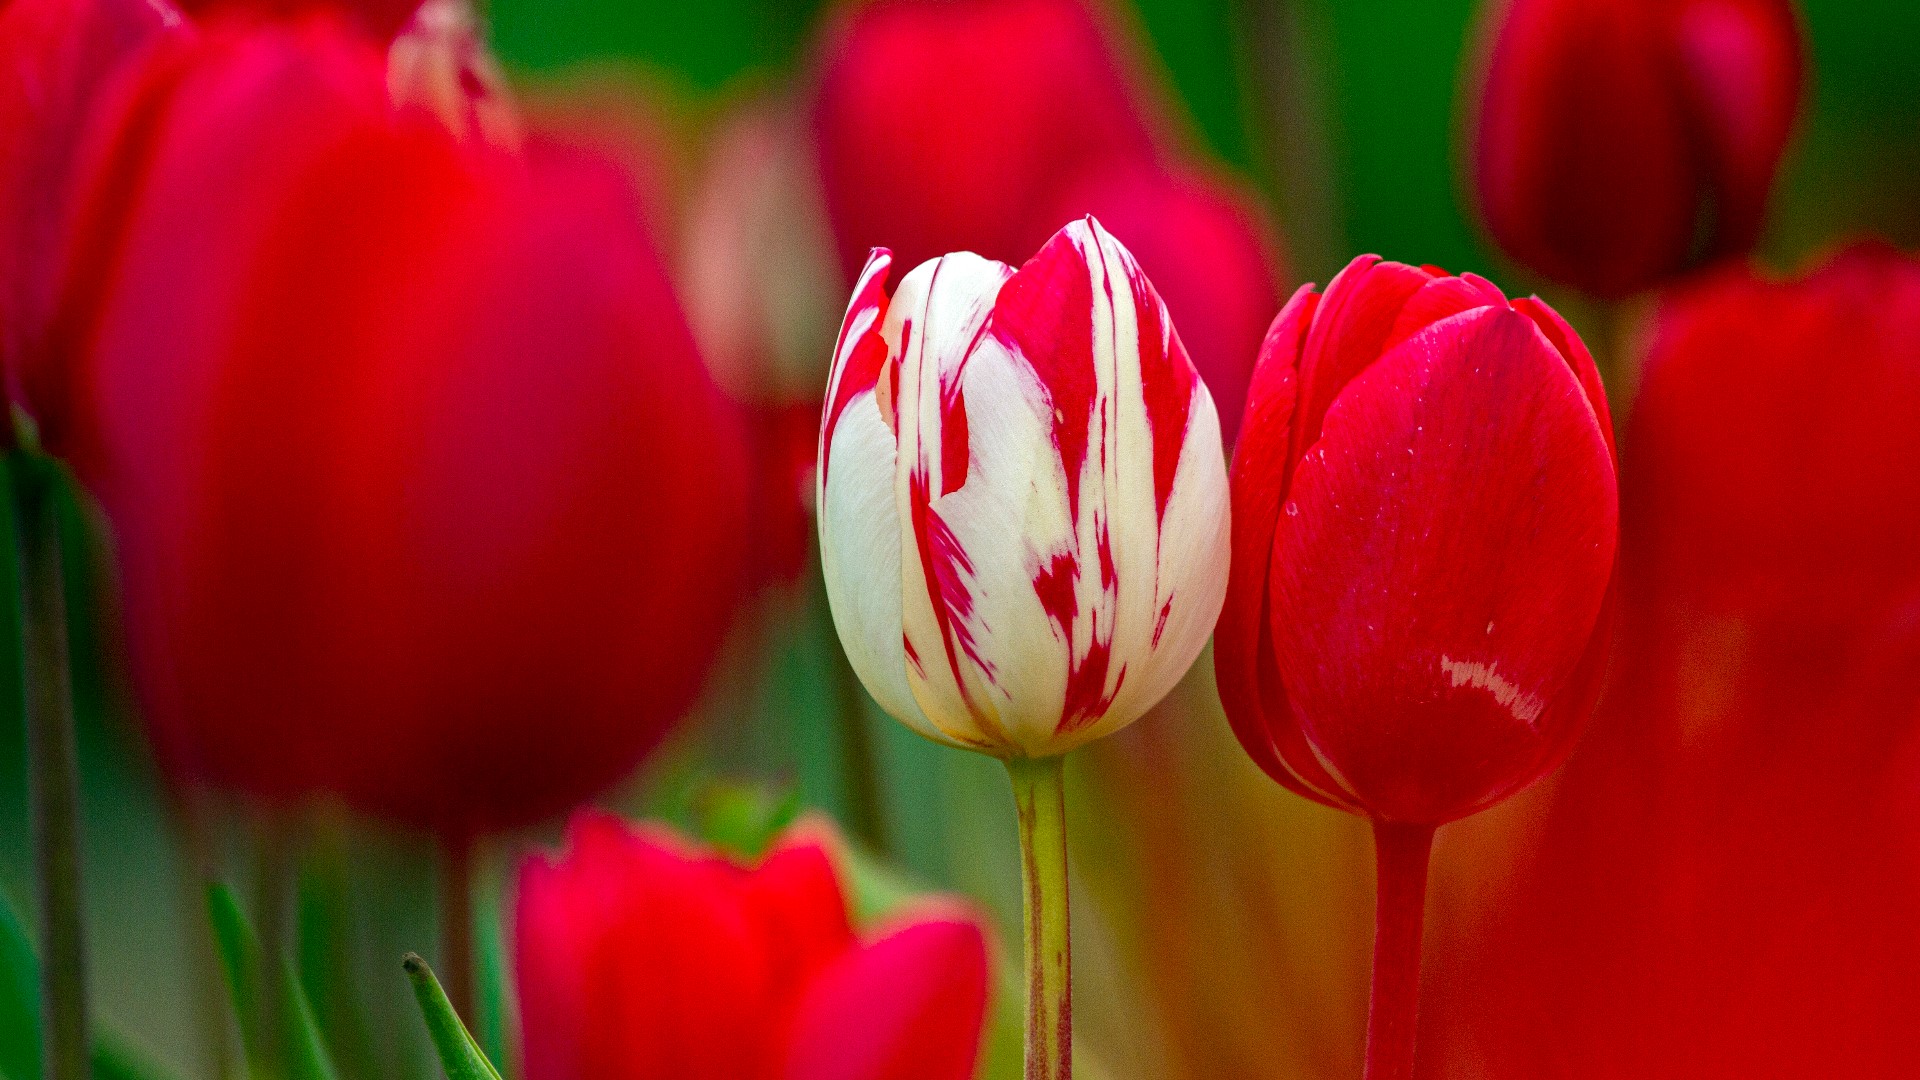 The wet weather could be good news for next year's tulip bloom.